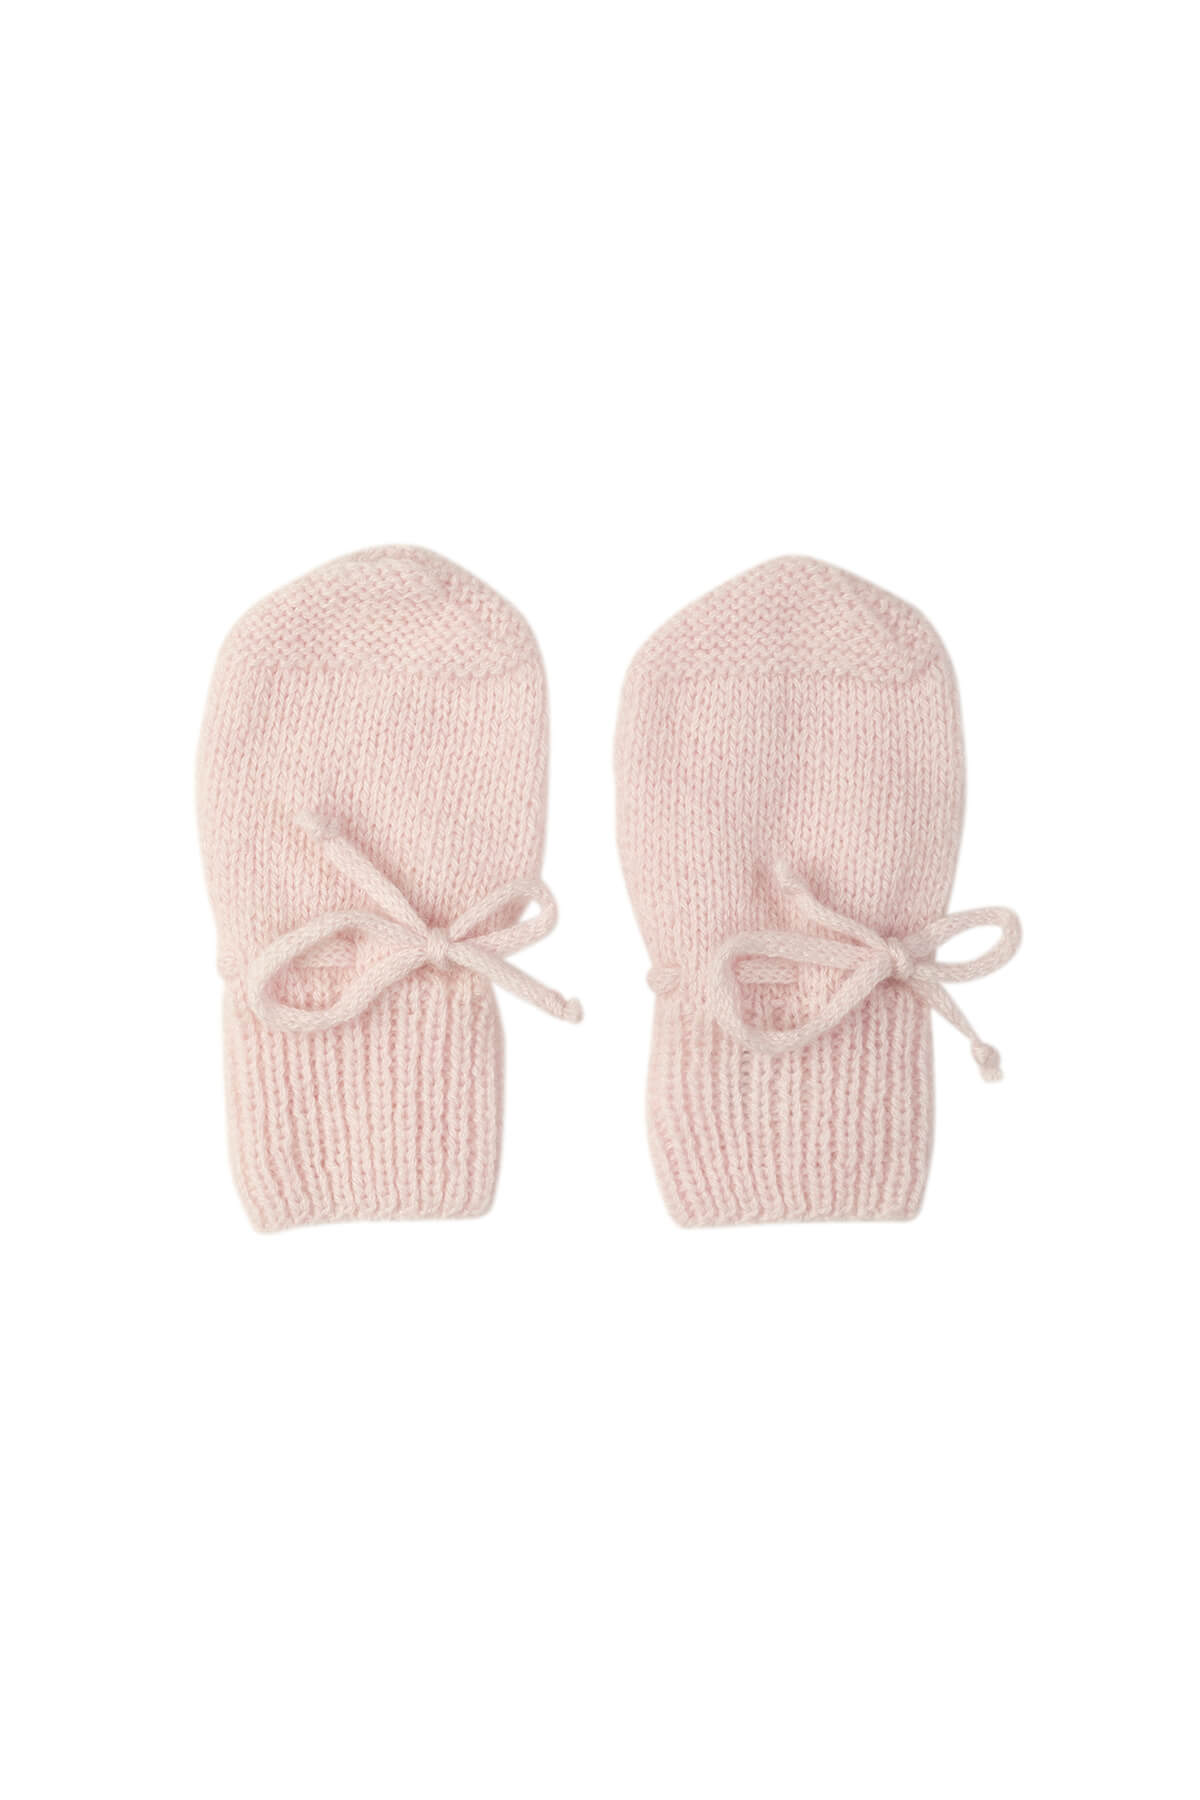 Johnstons of Elgin’s Baby's 1st Cashmere Accessories Gift Set with Blush Pink Cashmere Baby Mittens on a white background AW21GIFTSET20B